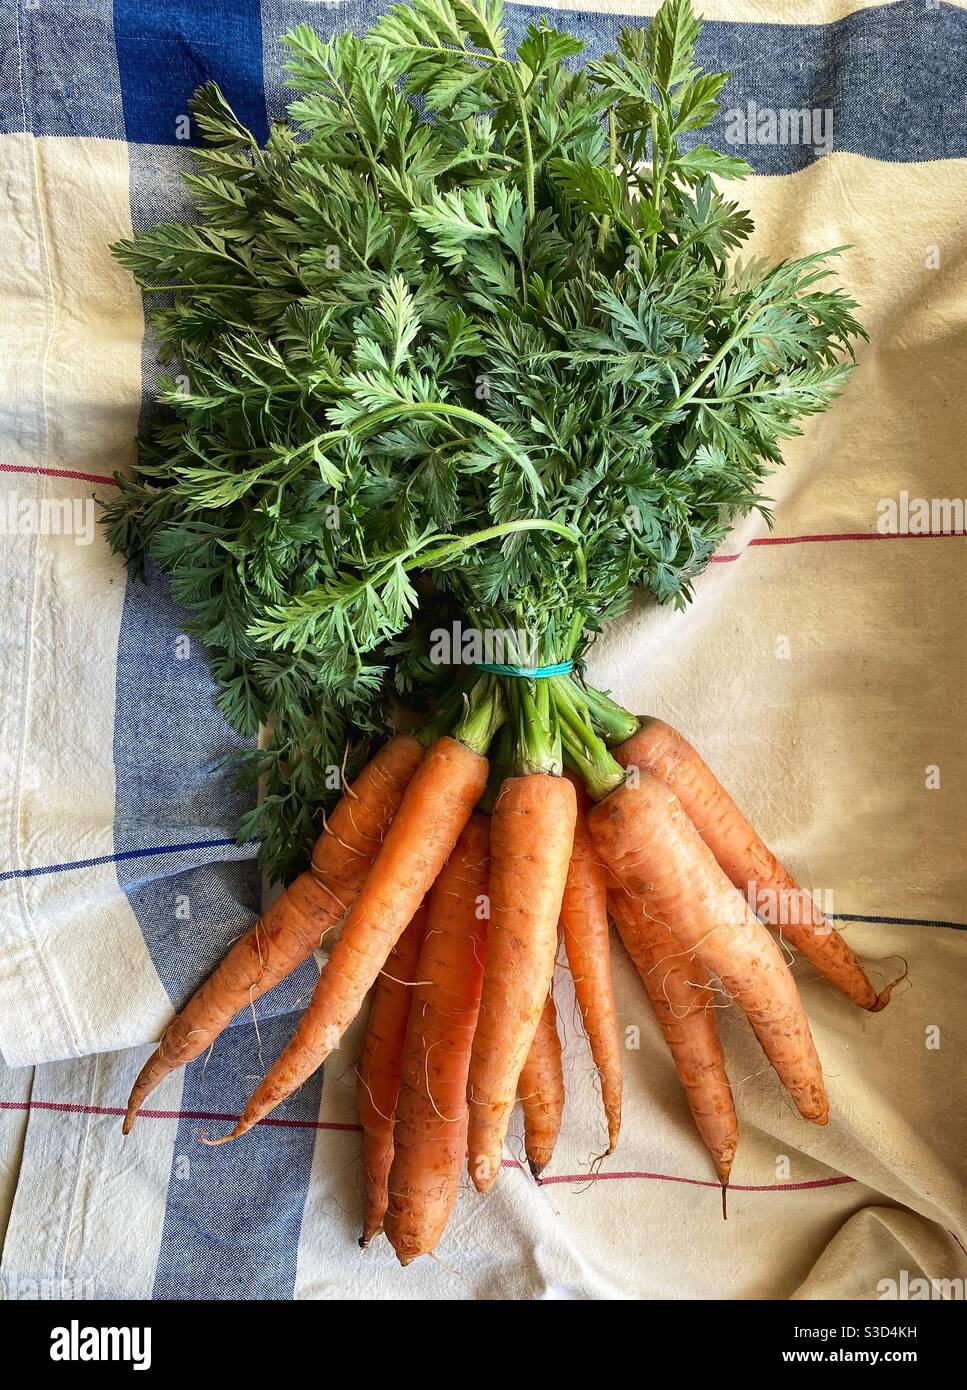 Bunch of organic carrot on a tablecloth Stock Photo